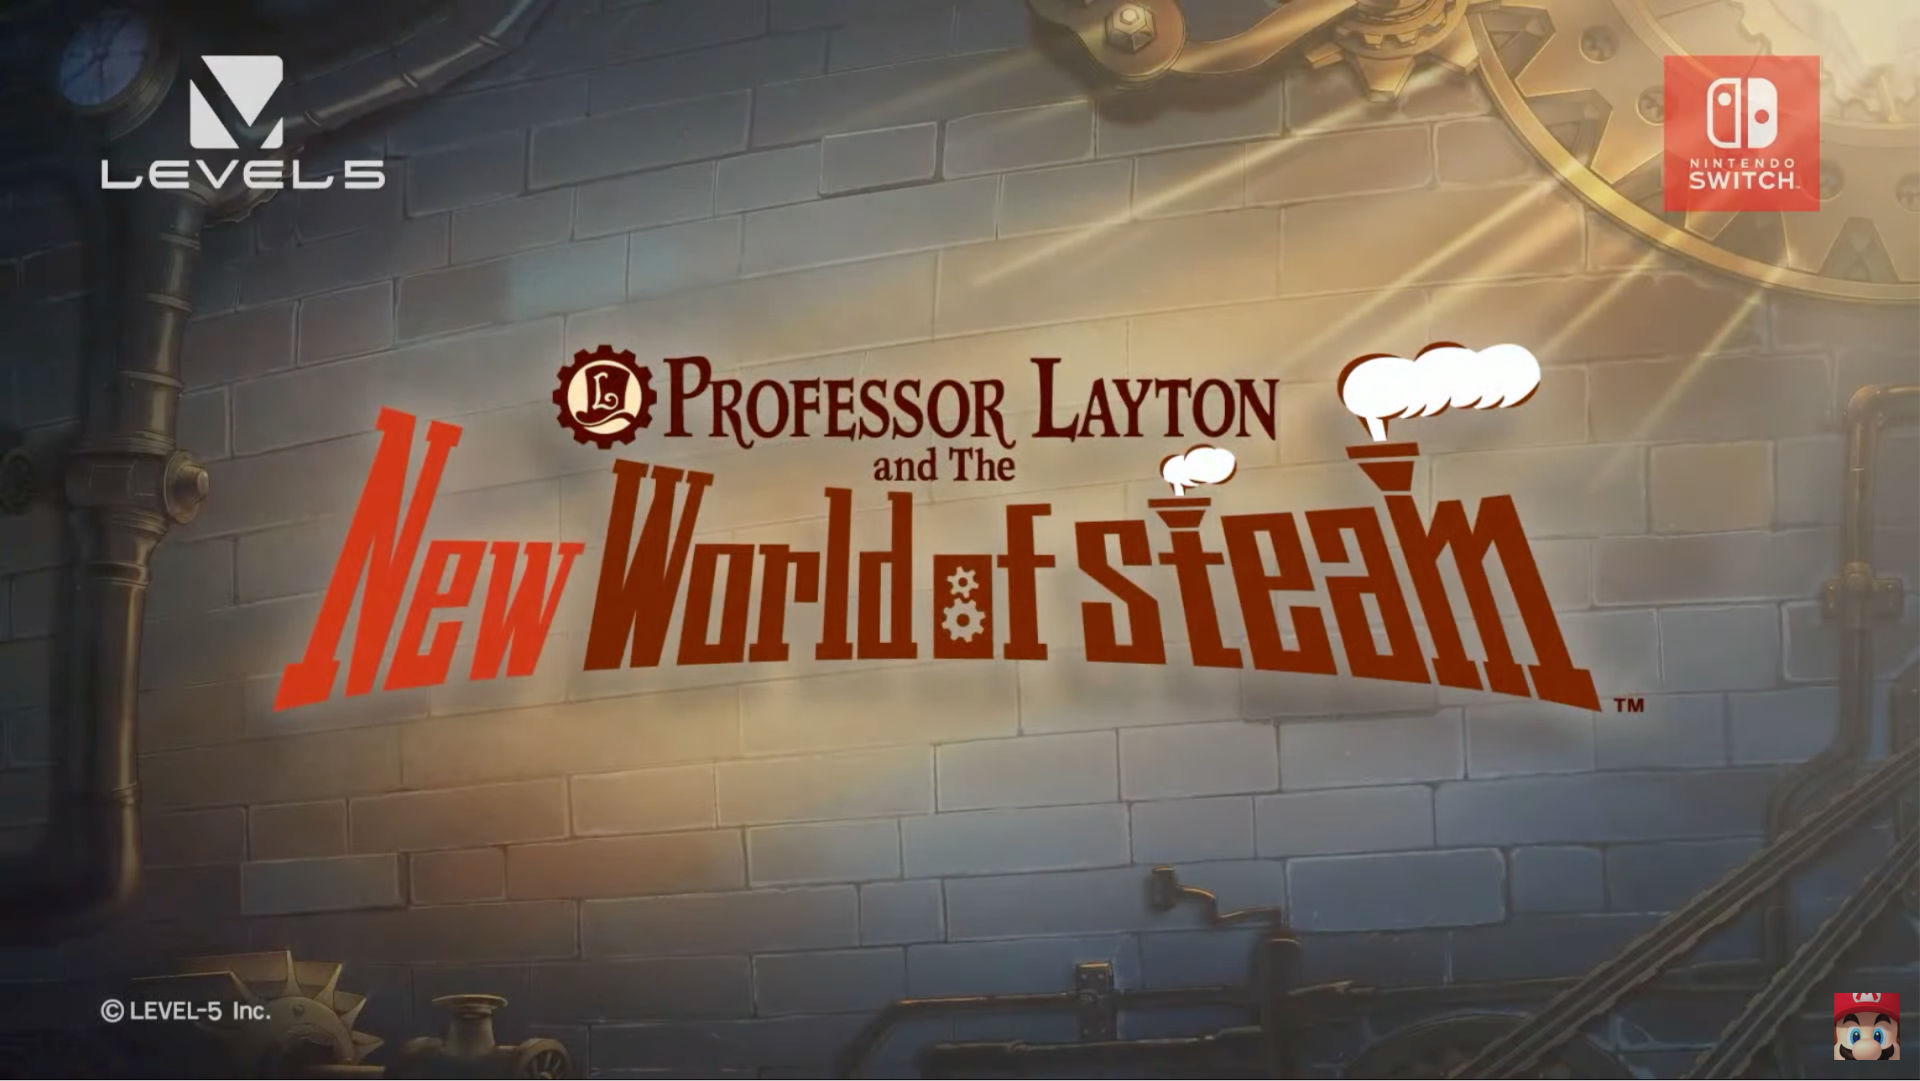 A still showcasing the logo of Professor Layton and The New World of Steam, set atop a brick wall with golden light highlighting its seams.